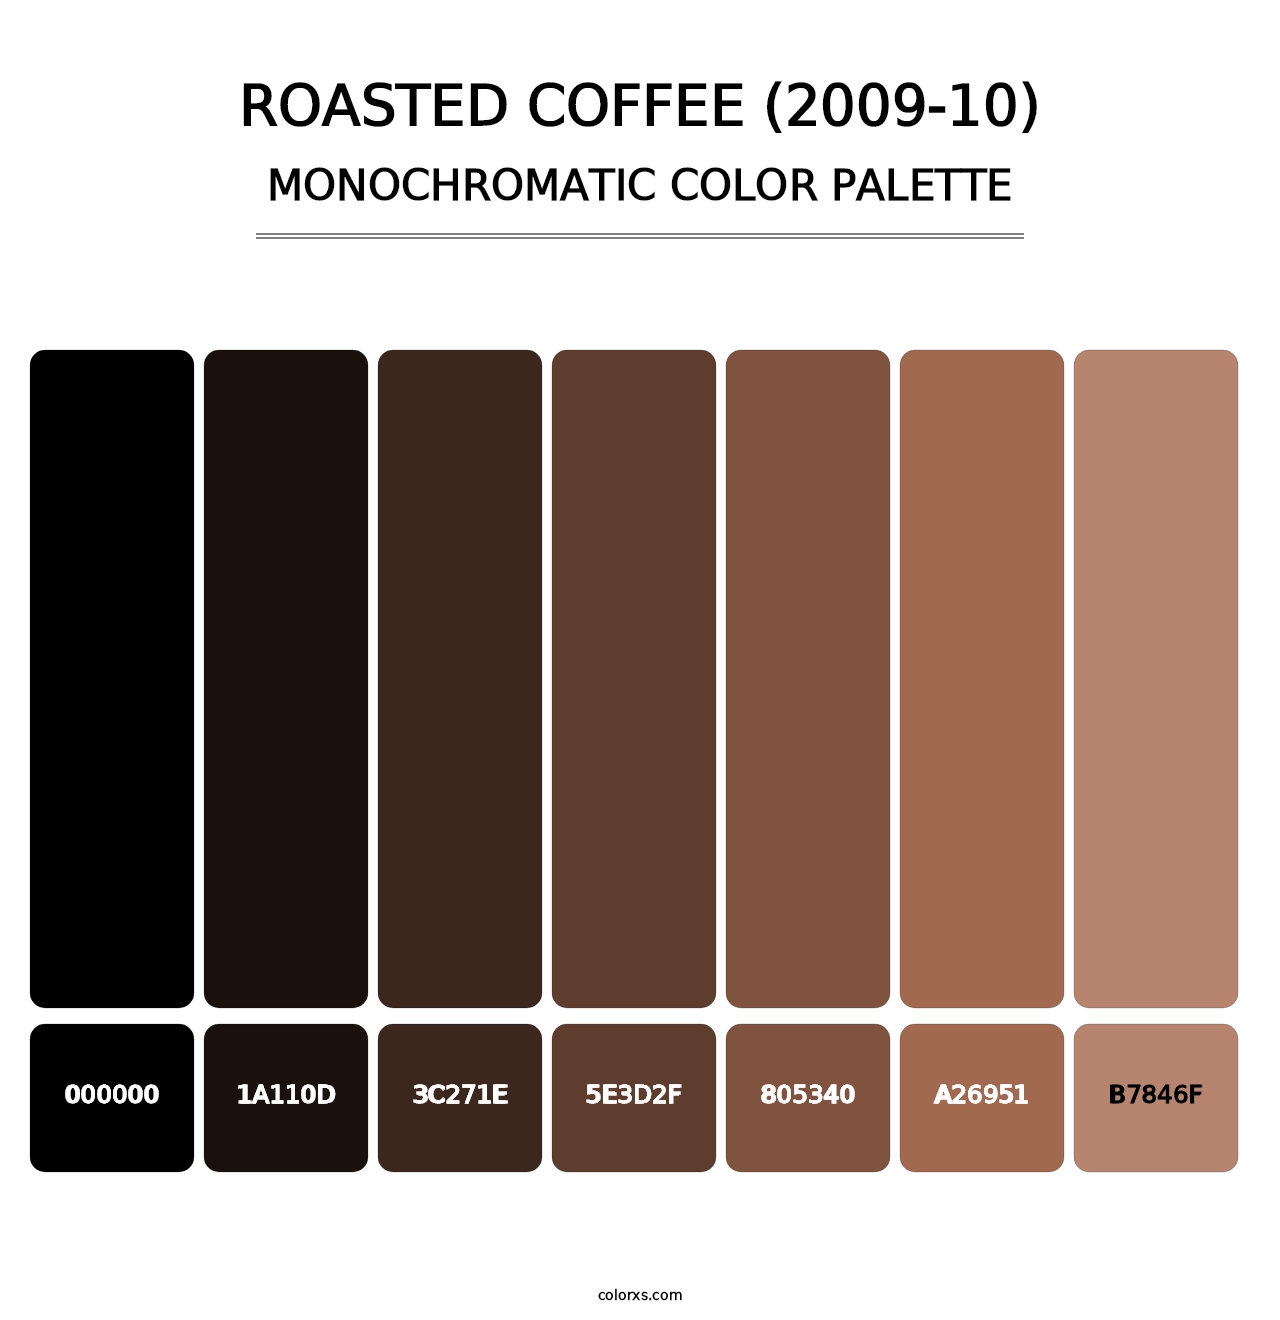 Roasted Coffee (2009-10) - Monochromatic Color Palette